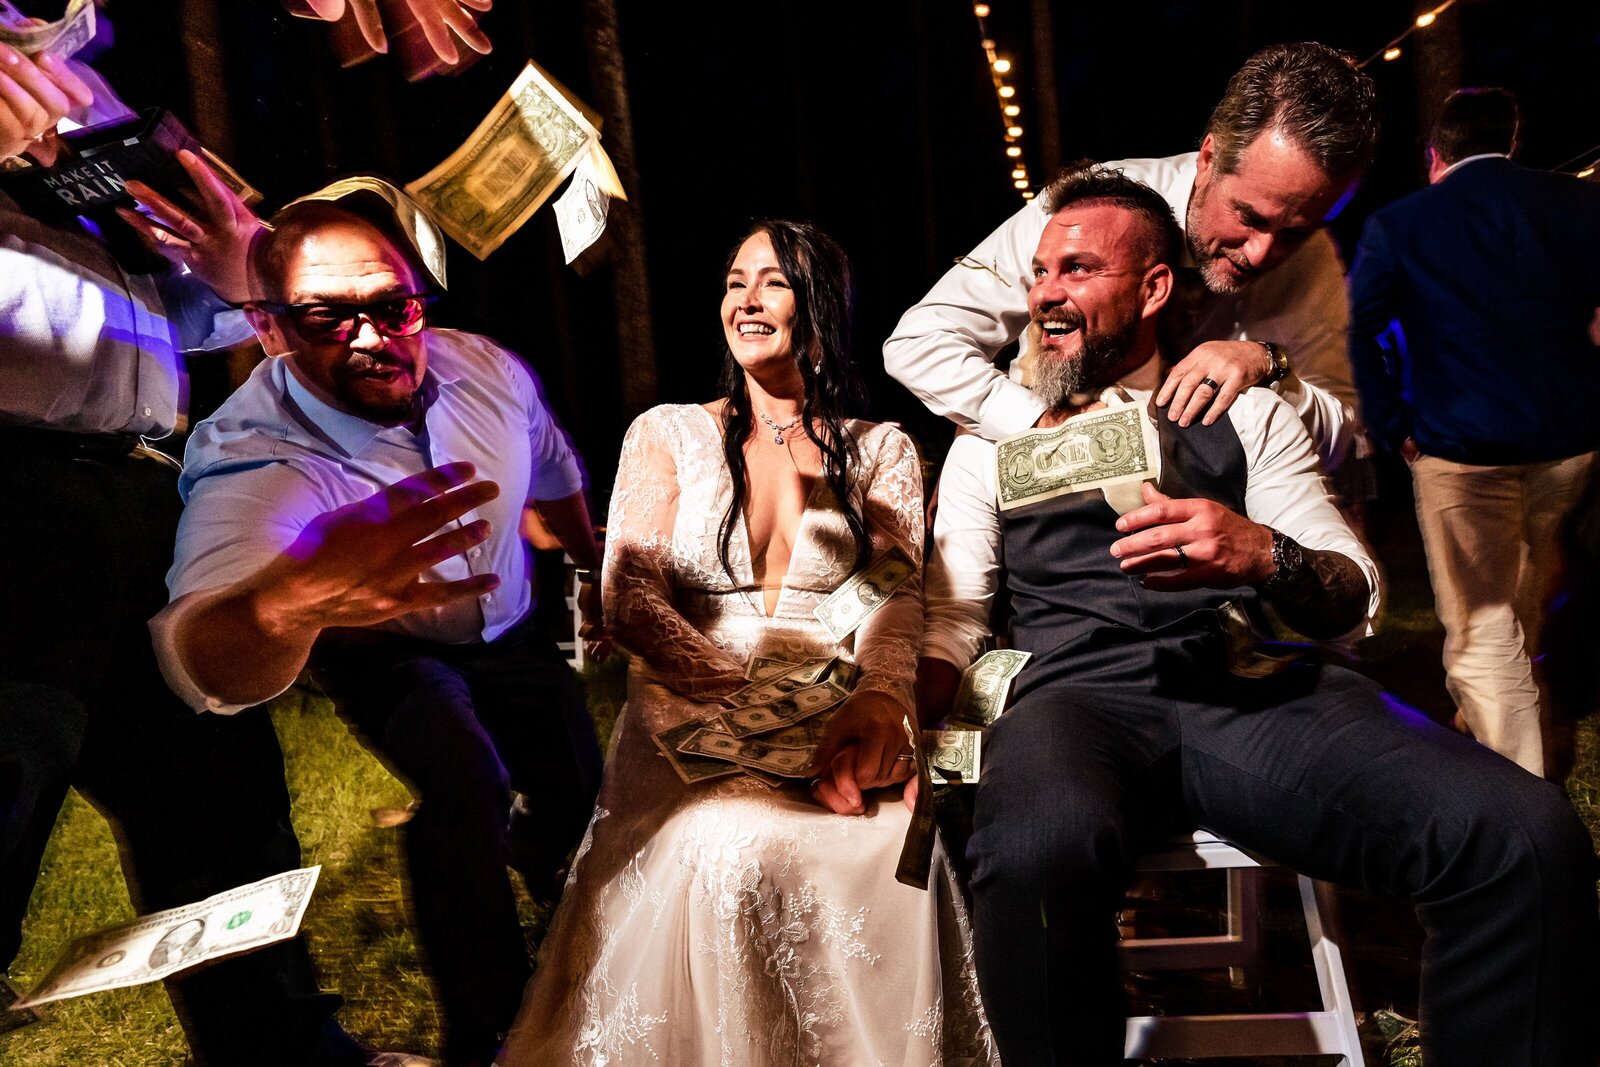 friends of the wedding couple throw money at them